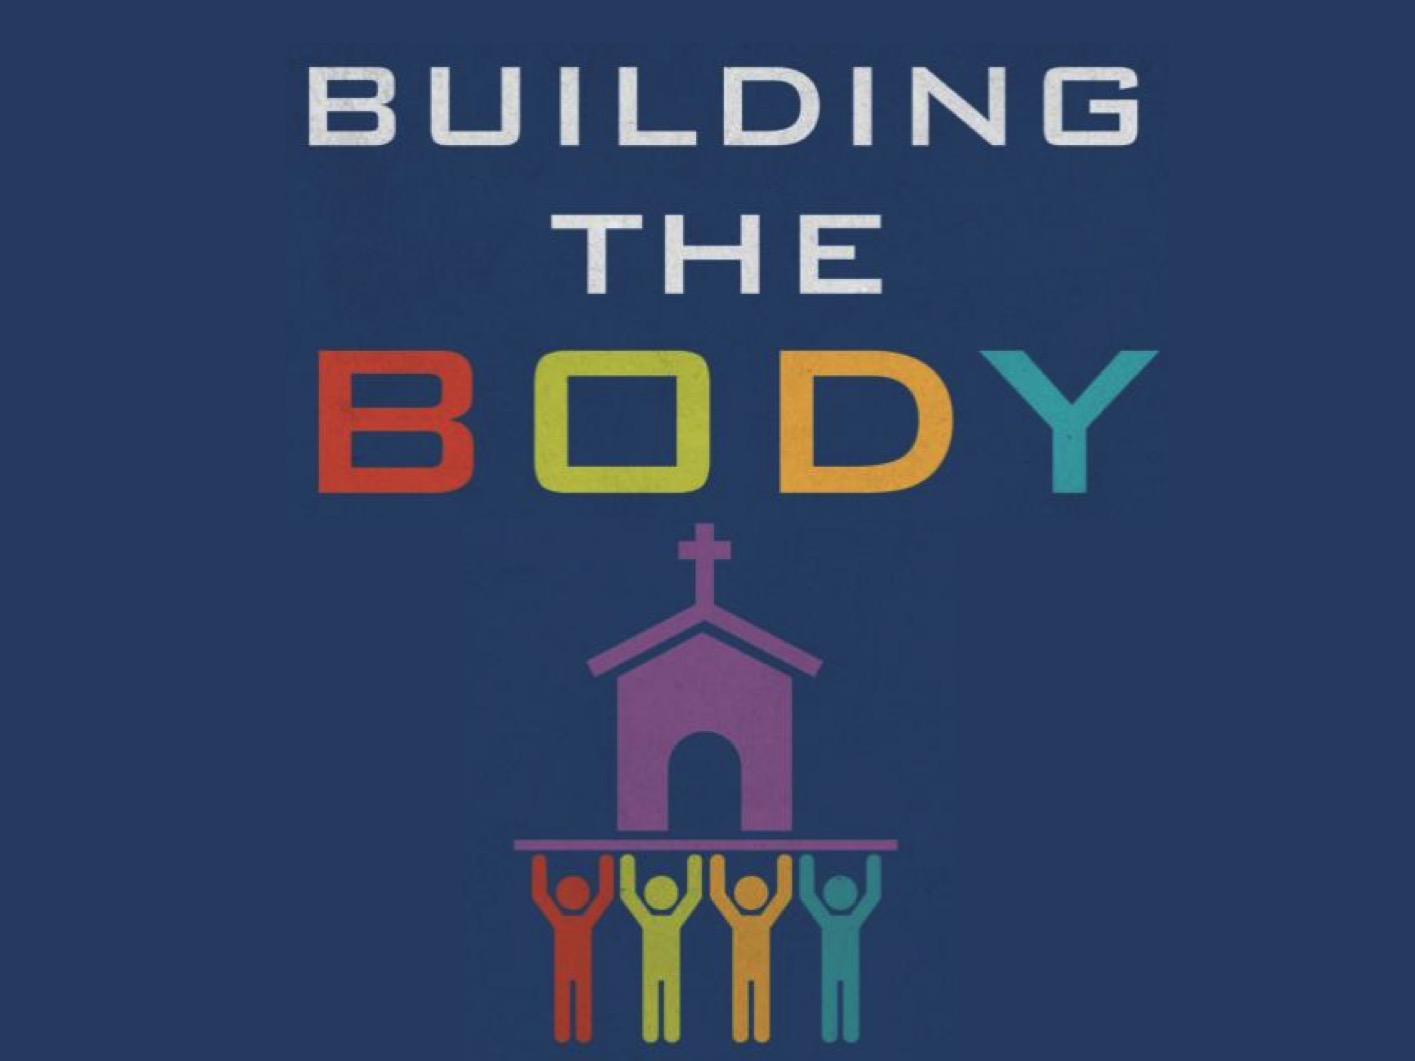 Building The Body: Sunday August 19, 2018